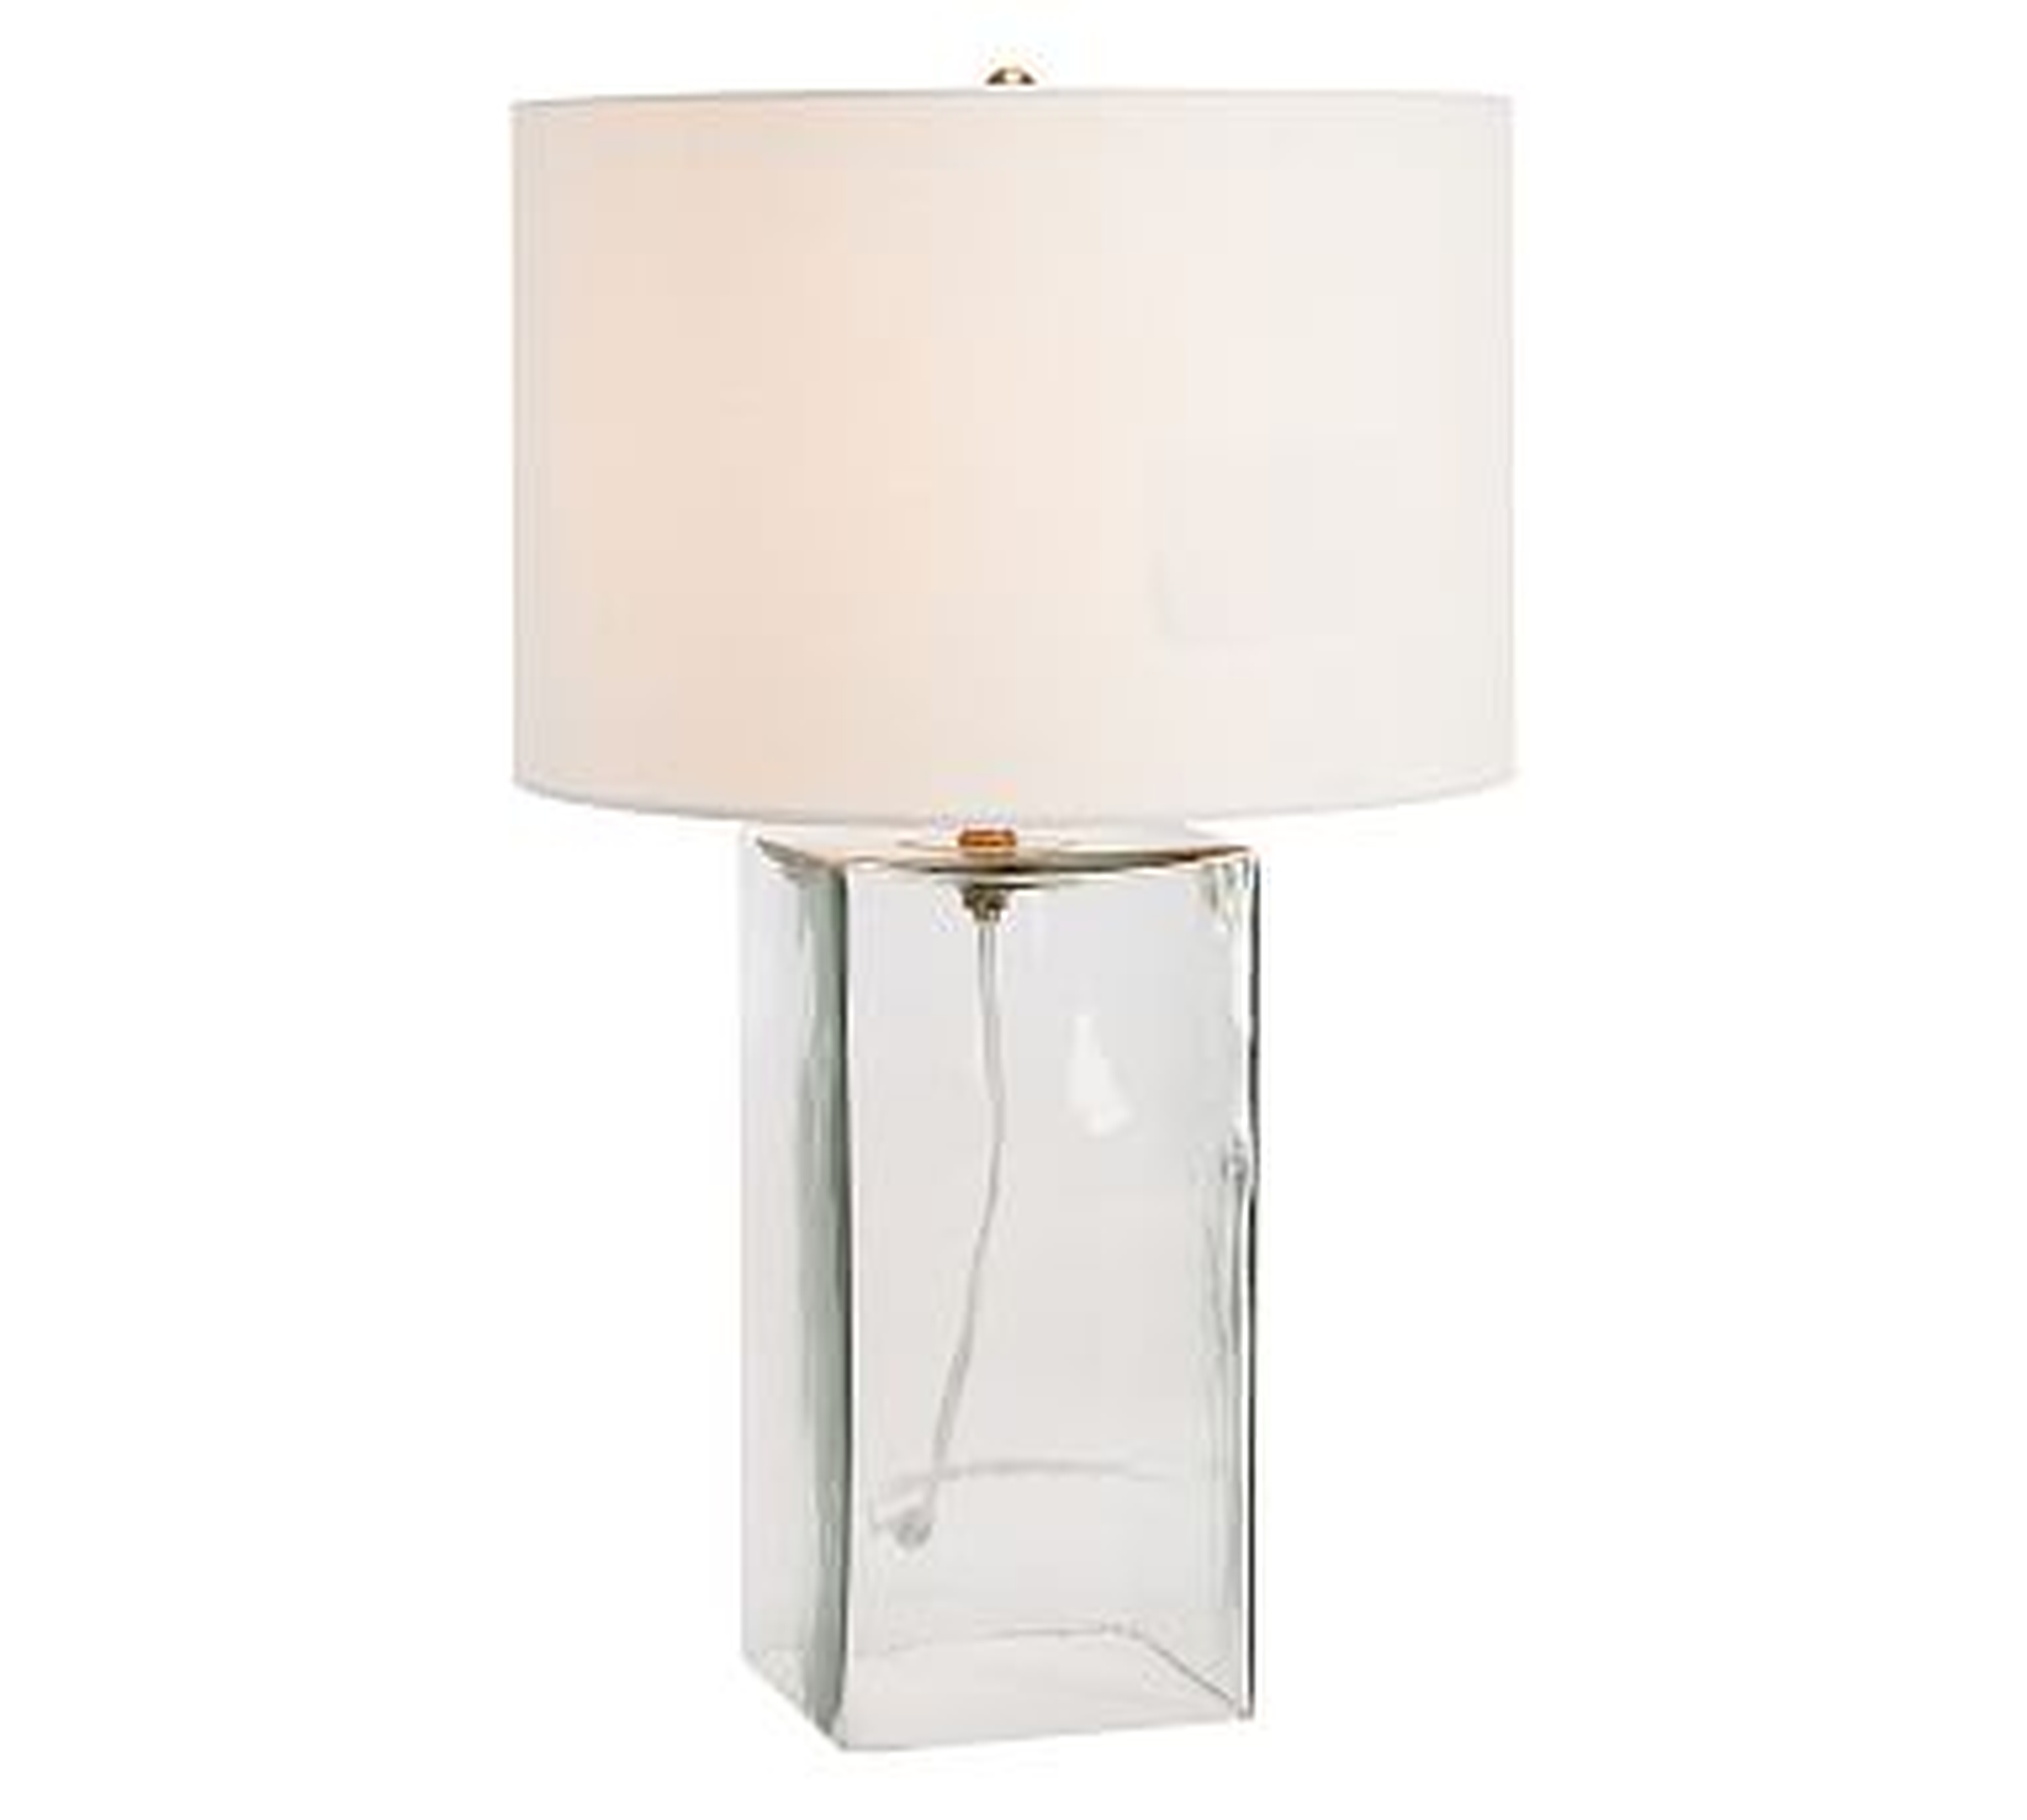 Blaine Recycled Glass Table Lamp with Medium Straight Sided Gallery Shade, White - Pottery Barn